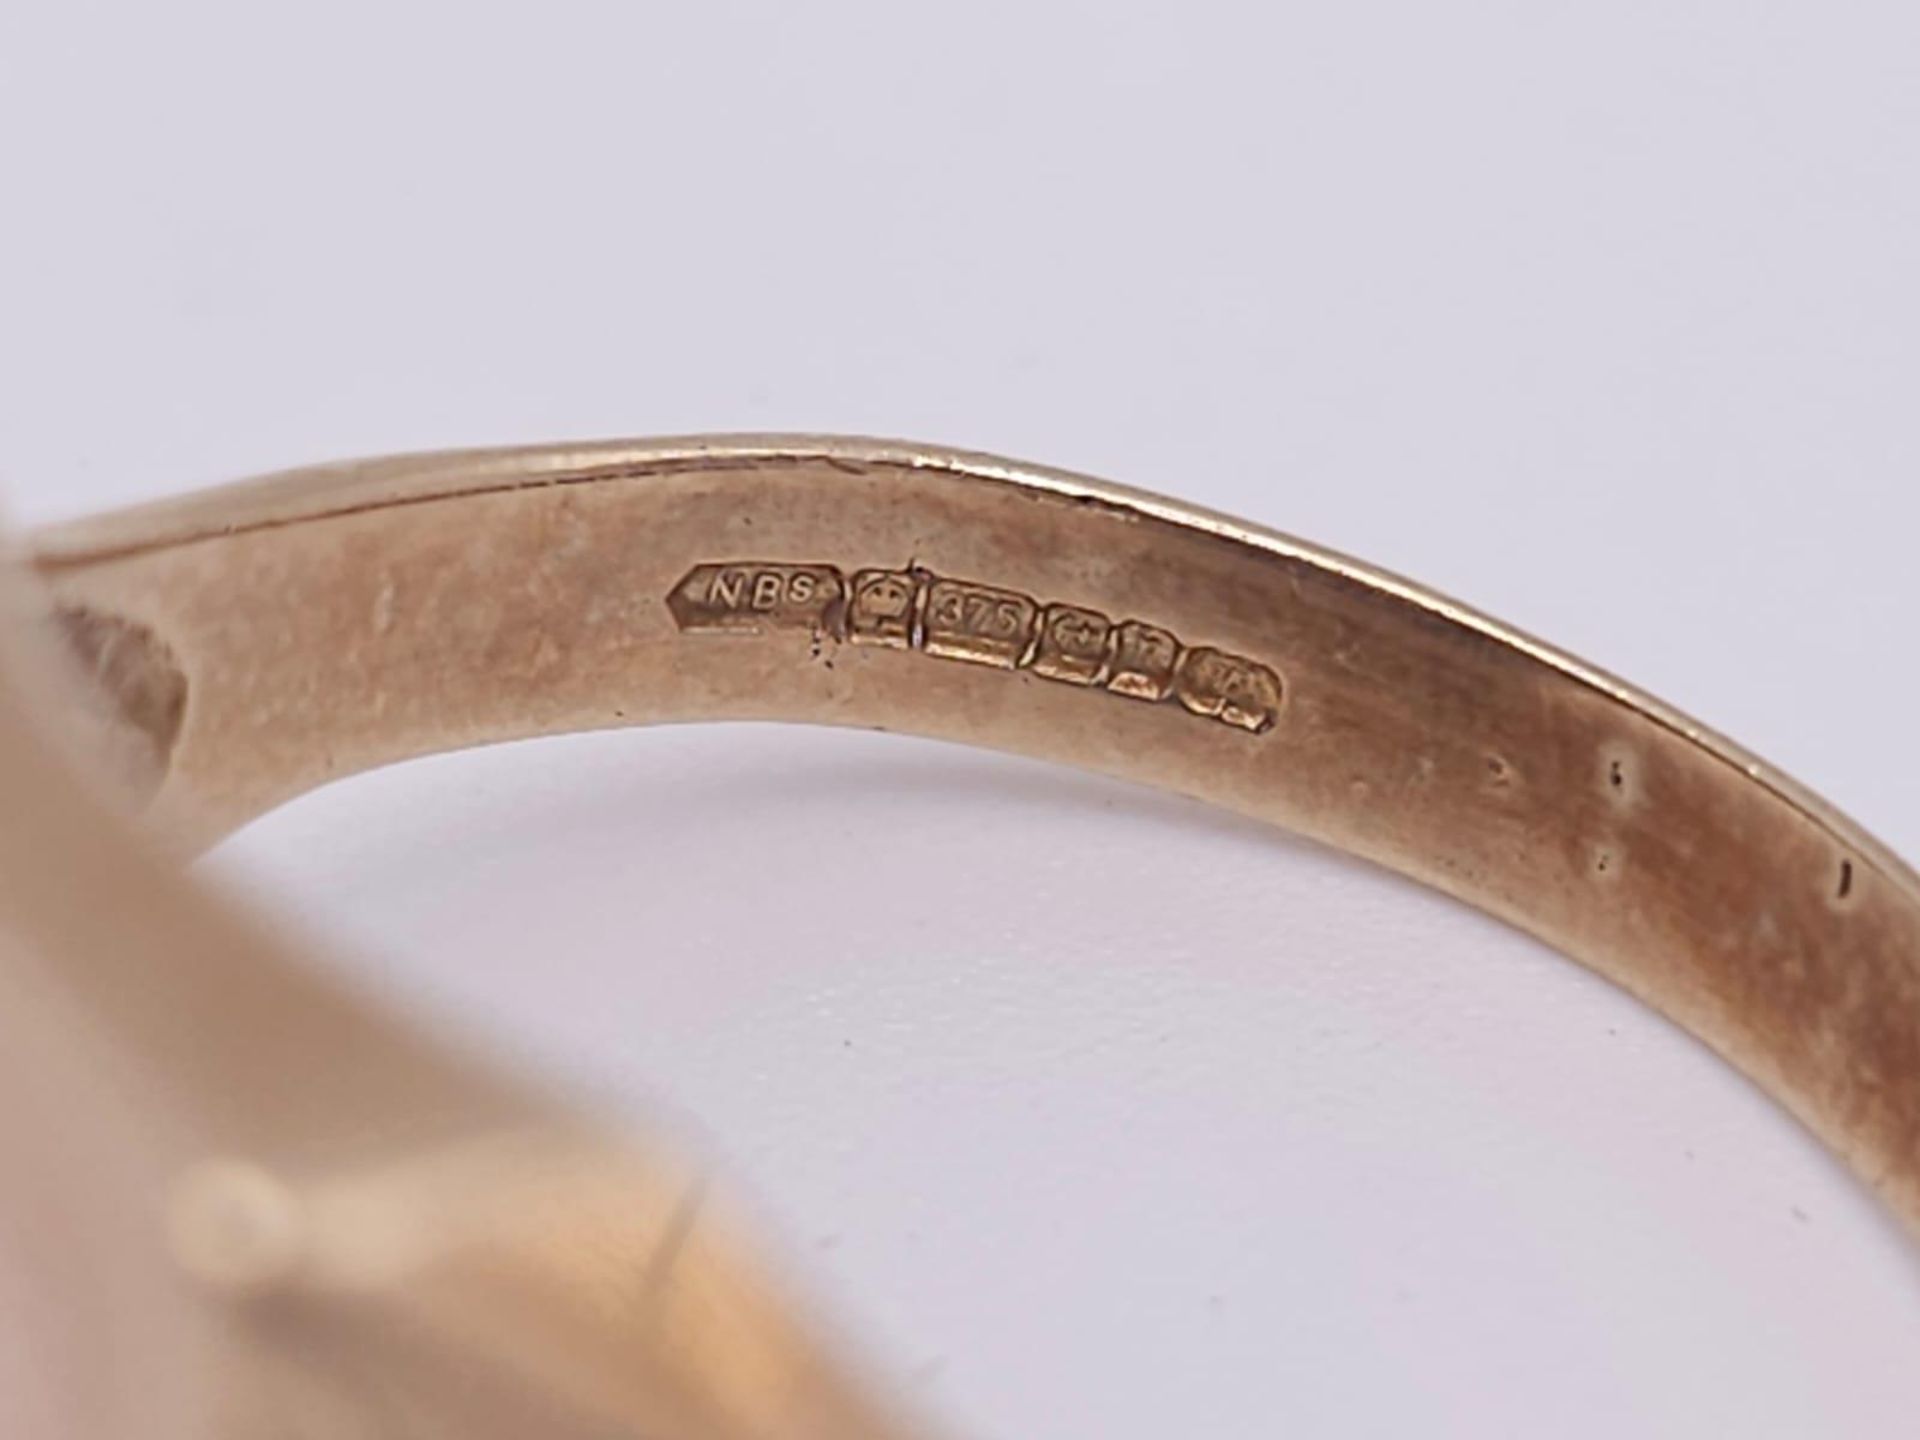 A GENTS 9K GOLD SIGNET RING WITH A HIDDEN MASONIC SYMBOL ON THE REVERSE, ENGRAVED PATTERN - Image 4 of 6